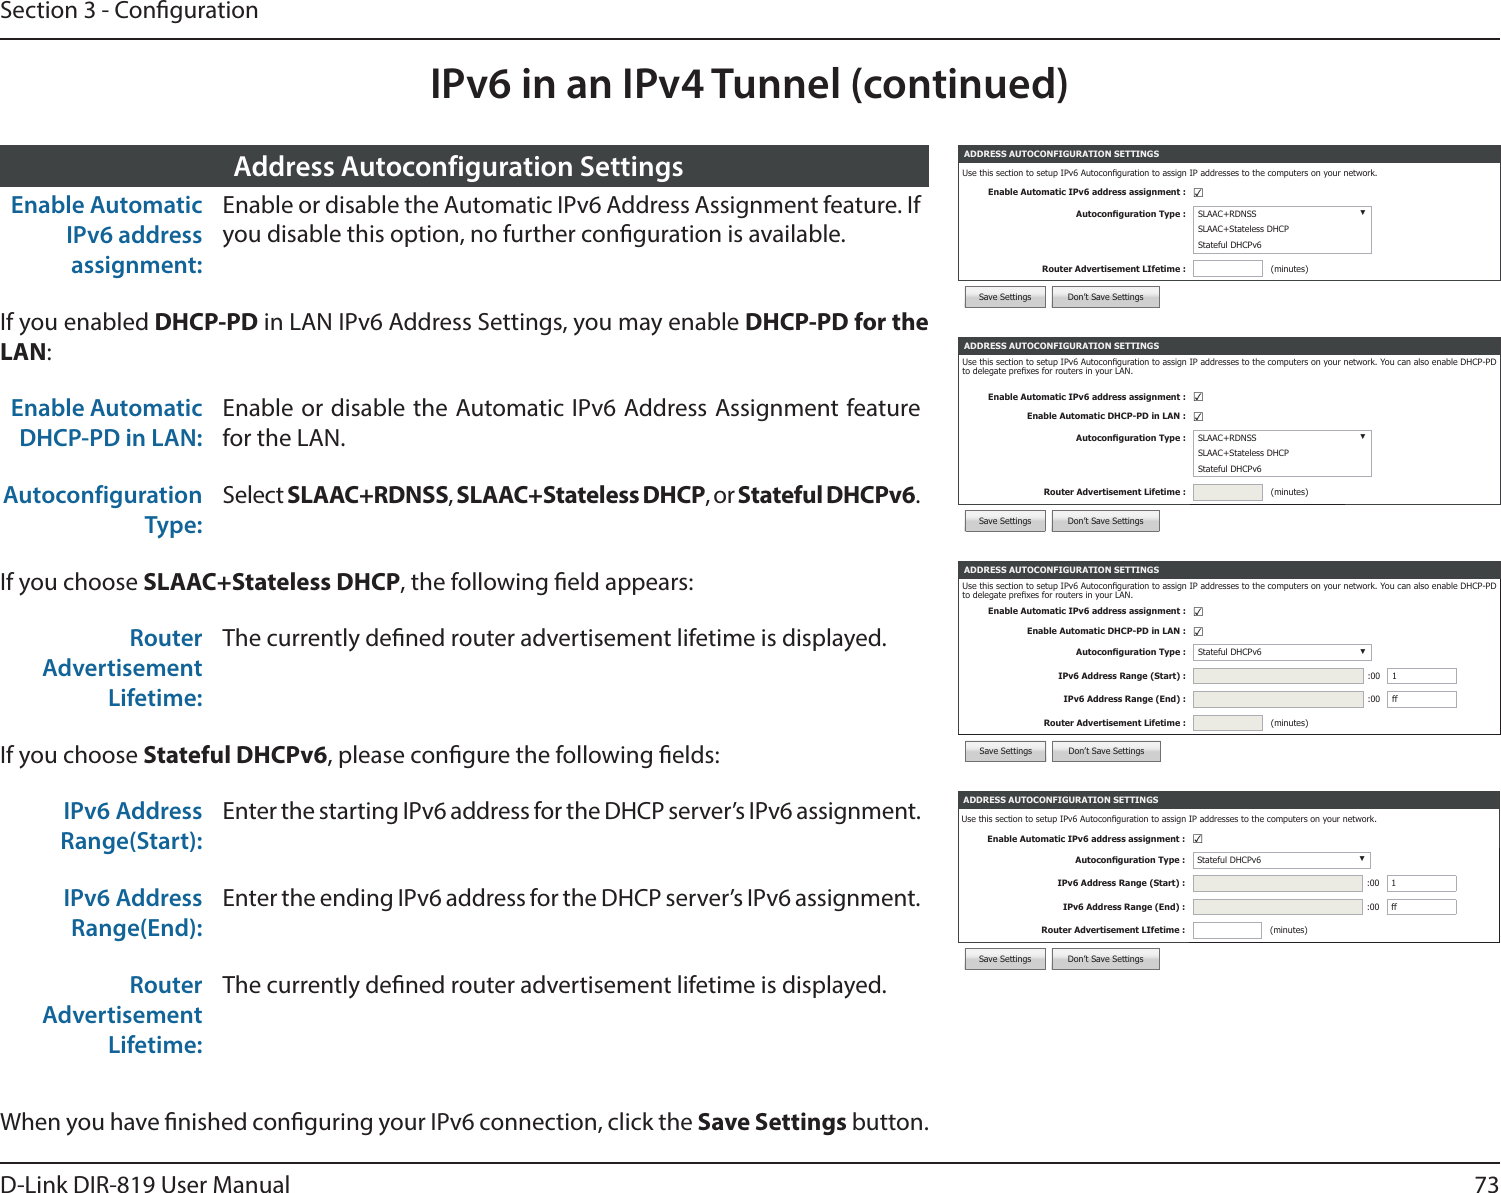 73D-Link DIR-819 User ManualSection 3 - CongurationIPv6 in an IPv4 Tunnel (continued)ADDRESS AUTOCONFIGURATION SETTINGSUse this section to setup IPv6 Autoconguration to assign IP addresses to the computers on your network. You can also enable DHCP-PD to delegate prexes for routers in your LAN.Enable Automatic IPv6 address assignment : ☑Enable Automatic DHCP-PD in LAN : ☑Autoconguration Type : Stateful DHCPv6 ▼IPv6 Address Range (Start) : :00 1IPv6 Address Range (End) : :00 ffRouter Advertisement Lifetime : (minutes)Save Settings Don’t Save SettingsEnable Automatic IPv6 address assignment:Enable or disable the Automatic IPv6 Address Assignment feature. If you disable this option, no further conguration is available.If you enabled DHCP-PD in LAN IPv6 Address Settings, you may enable DHCP-PD for the LAN:Enable Automatic DHCP-PD in LAN:Enable or disable the Automatic IPv6 Address Assignment feature for the LAN.Autoconfiguration Type:Select SLAAC+RDNSS, SLAAC+Stateless DHCP, or Stateful DHCPv6.If you choose SLAAC+Stateless DHCP, the following eld appears:Router Advertisement Lifetime:The currently dened router advertisement lifetime is displayed.If you choose Stateful DHCPv6, please congure the following elds:IPv6 Address Range(Start):Enter the starting IPv6 address for the DHCP server’s IPv6 assignment.IPv6 Address Range(End):Enter the ending IPv6 address for the DHCP server’s IPv6 assignment.Router Advertisement Lifetime:The currently dened router advertisement lifetime is displayed.Address Autoconfiguration SettingsADDRESS AUTOCONFIGURATION SETTINGSUse this section to setup IPv6 Autoconguration to assign IP addresses to the computers on your network. You can also enable DHCP-PD to delegate prexes for routers in your LAN.Enable Automatic IPv6 address assignment : ☑Enable Automatic DHCP-PD in LAN : ☑Autoconguration Type : SLAAC+RDNSS ▼SLAAC+Stateless DHCPStateful DHCPv6Router Advertisement Lifetime : (minutes)Save Settings Don’t Save SettingsWhen you have nished conguring your IPv6 connection, click the Save Settings button.ADDRESS AUTOCONFIGURATION SETTINGSUse this section to setup IPv6 Autoconguration to assign IP addresses to the computers on your network.Enable Automatic IPv6 address assignment : ☑Autoconguration Type : Stateful DHCPv6 ▼IPv6 Address Range (Start) : :00 1IPv6 Address Range (End) : :00 ffRouter Advertisement LIfetime : (minutes)Save Settings Don’t Save SettingsADDRESS AUTOCONFIGURATION SETTINGSUse this section to setup IPv6 Autoconguration to assign IP addresses to the computers on your network.Enable Automatic IPv6 address assignment : ☑Autoconguration Type : SLAAC+RDNSS ▼SLAAC+Stateless DHCPStateful DHCPv6Router Advertisement LIfetime : (minutes)Save Settings Don’t Save Settings